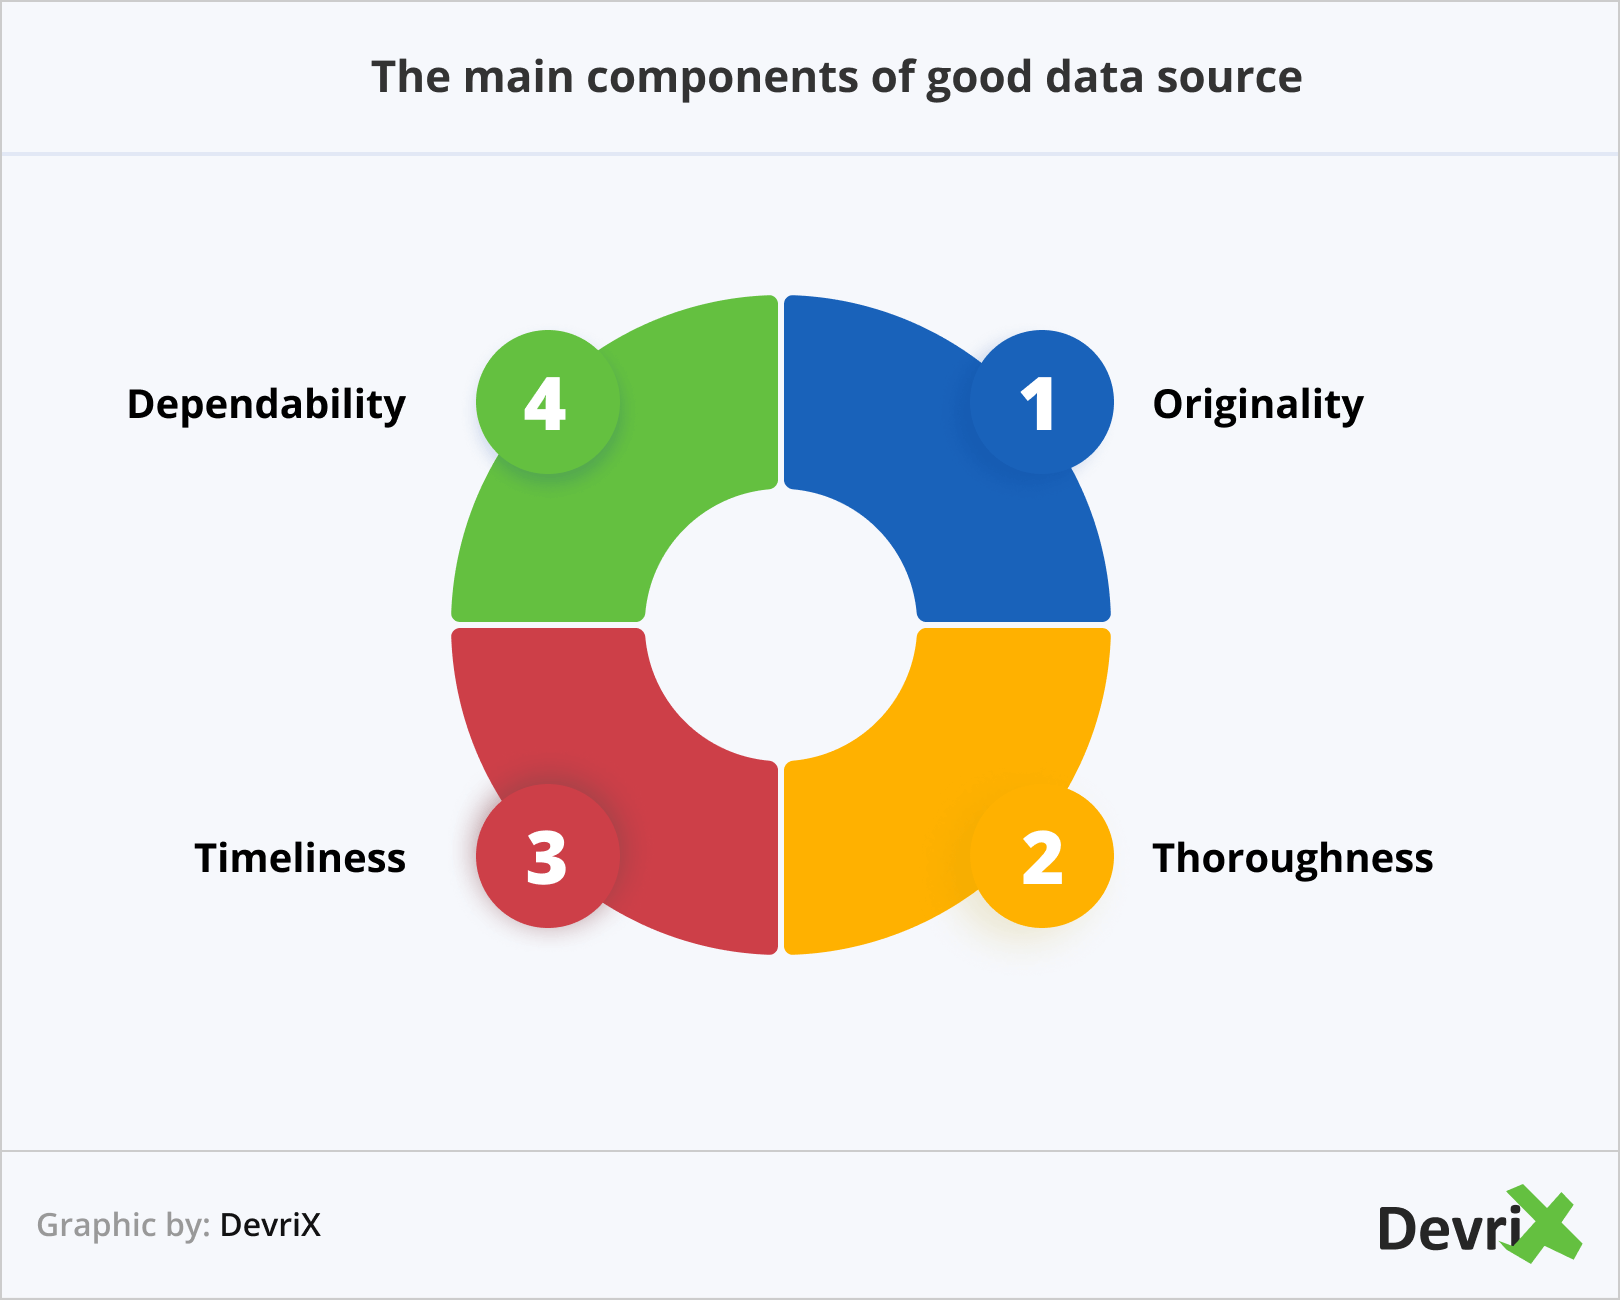 The main components of good data source